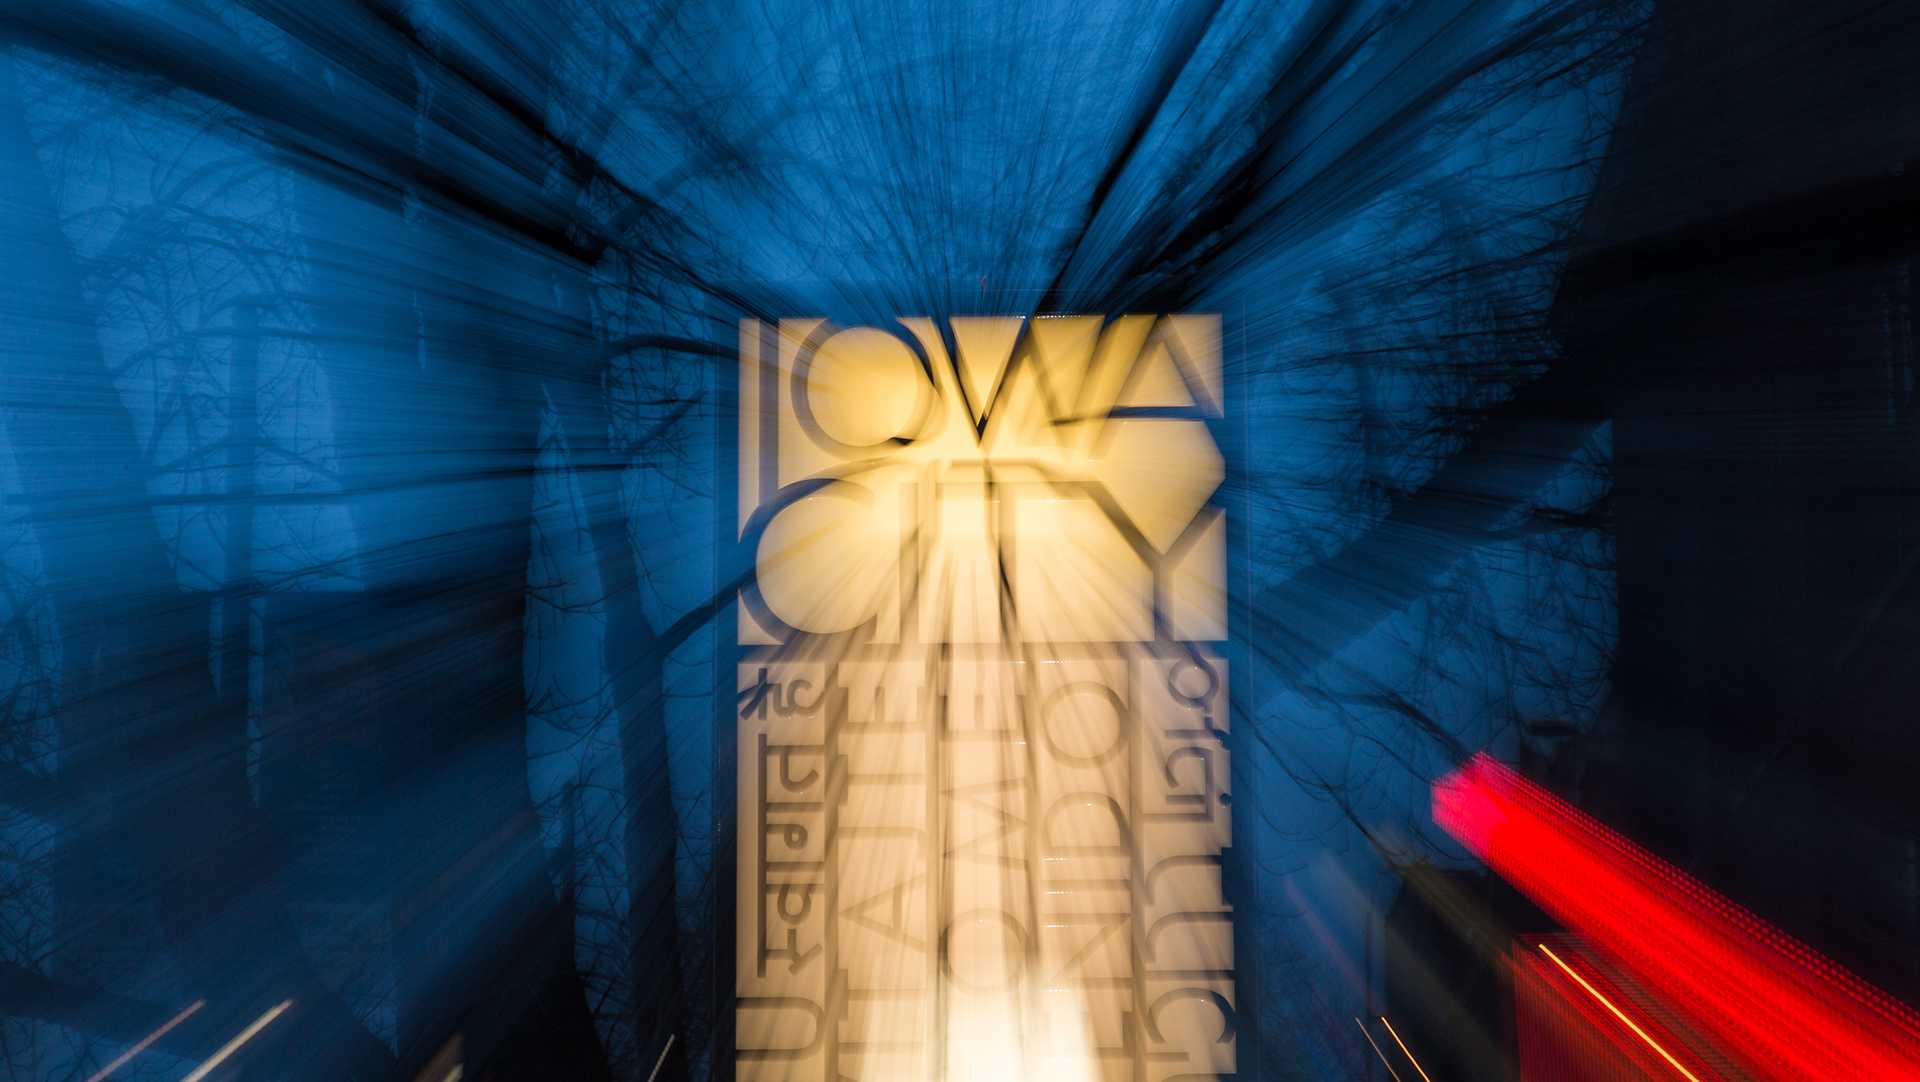 Signs in downtown Iowa City pay homage to its status as a UNESCO City of Literature. Iowa City is the host for the 2018 annual meeting of the UNESCO Cities of Literature. Apr. 2, 2018 (David Harmantas/The Daily Iowan)